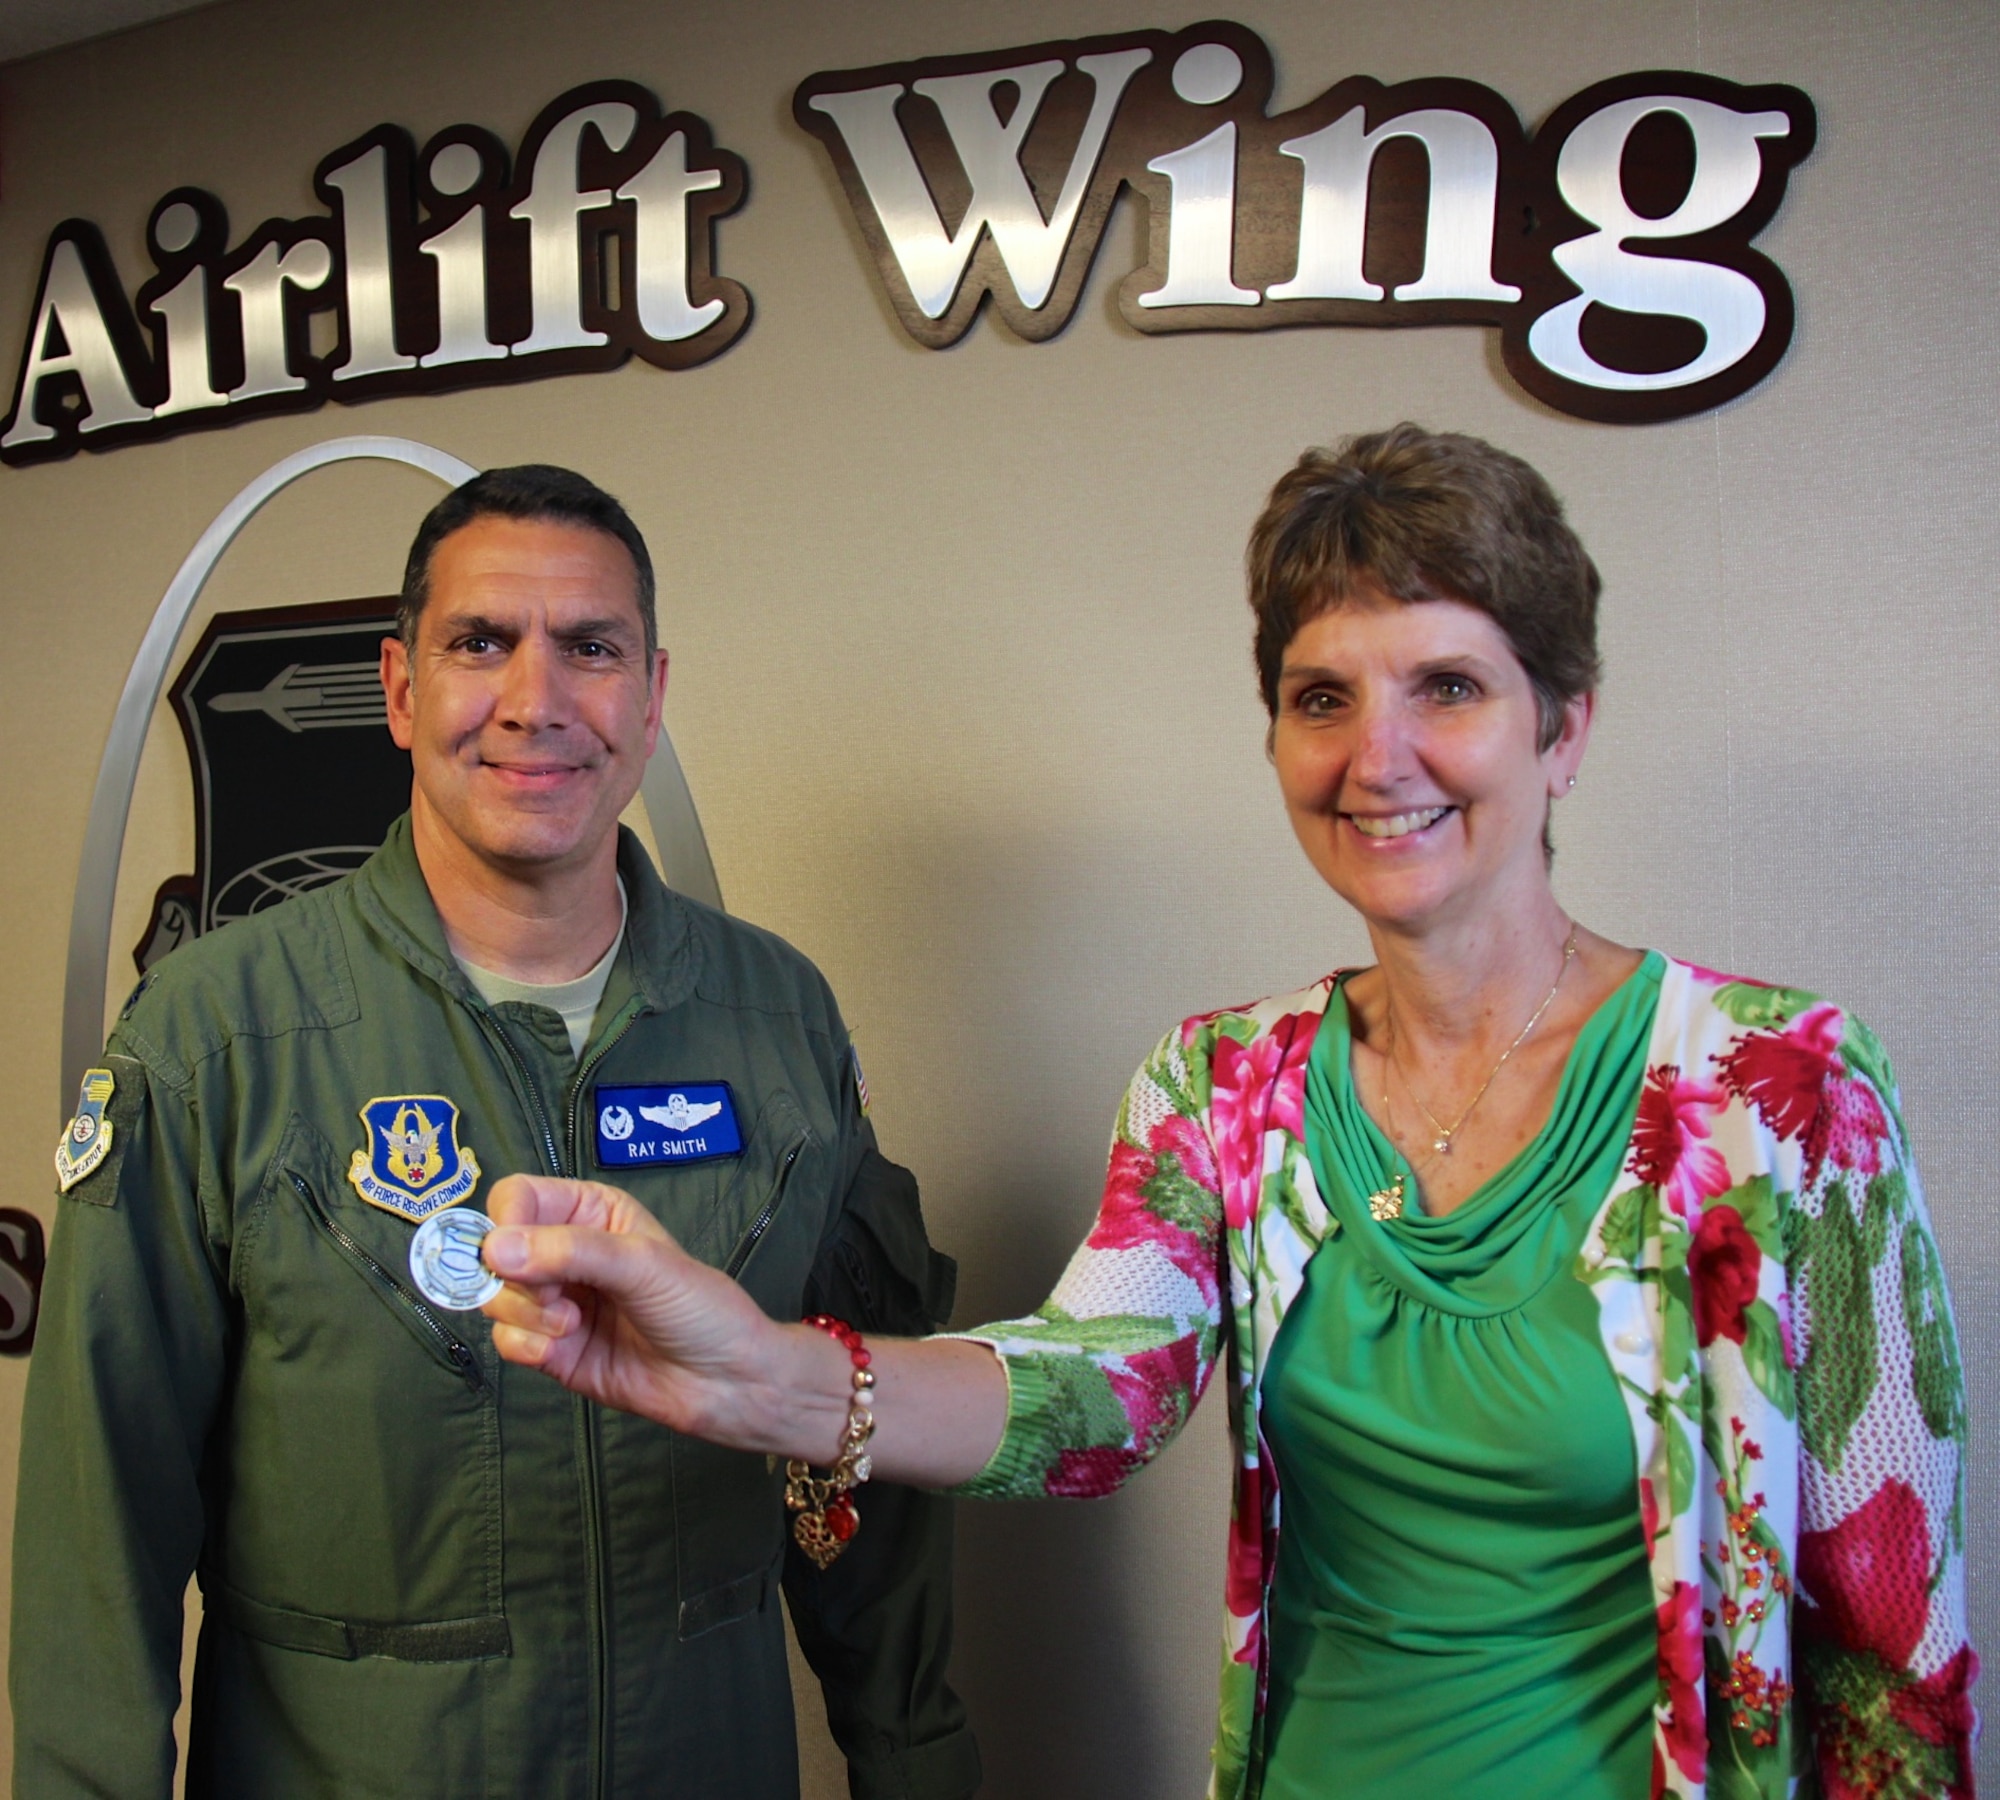 Commander of the 932nd Operations Group at the 932nd Airlift Wing, Lt. Col. Ray Smith, presents Lt. Col. Stephanie Boehning with a special coin recognizing her military years of service to the unit and the nation.  She enjoyed the surprise retirement party put on by her fellow wing staff members on May 18, 2017 at Scott Air Force Base, Illinois.  Boehning served with honor during Desert Storm overseas, and a variety of jobs with the 932nd Airlift Wing.  She will now will continue working as the wing's civilian process improvement manager and certified Covey facilitator.  (U.S. Air Force photo by Lt. Col. Stan Paregien)